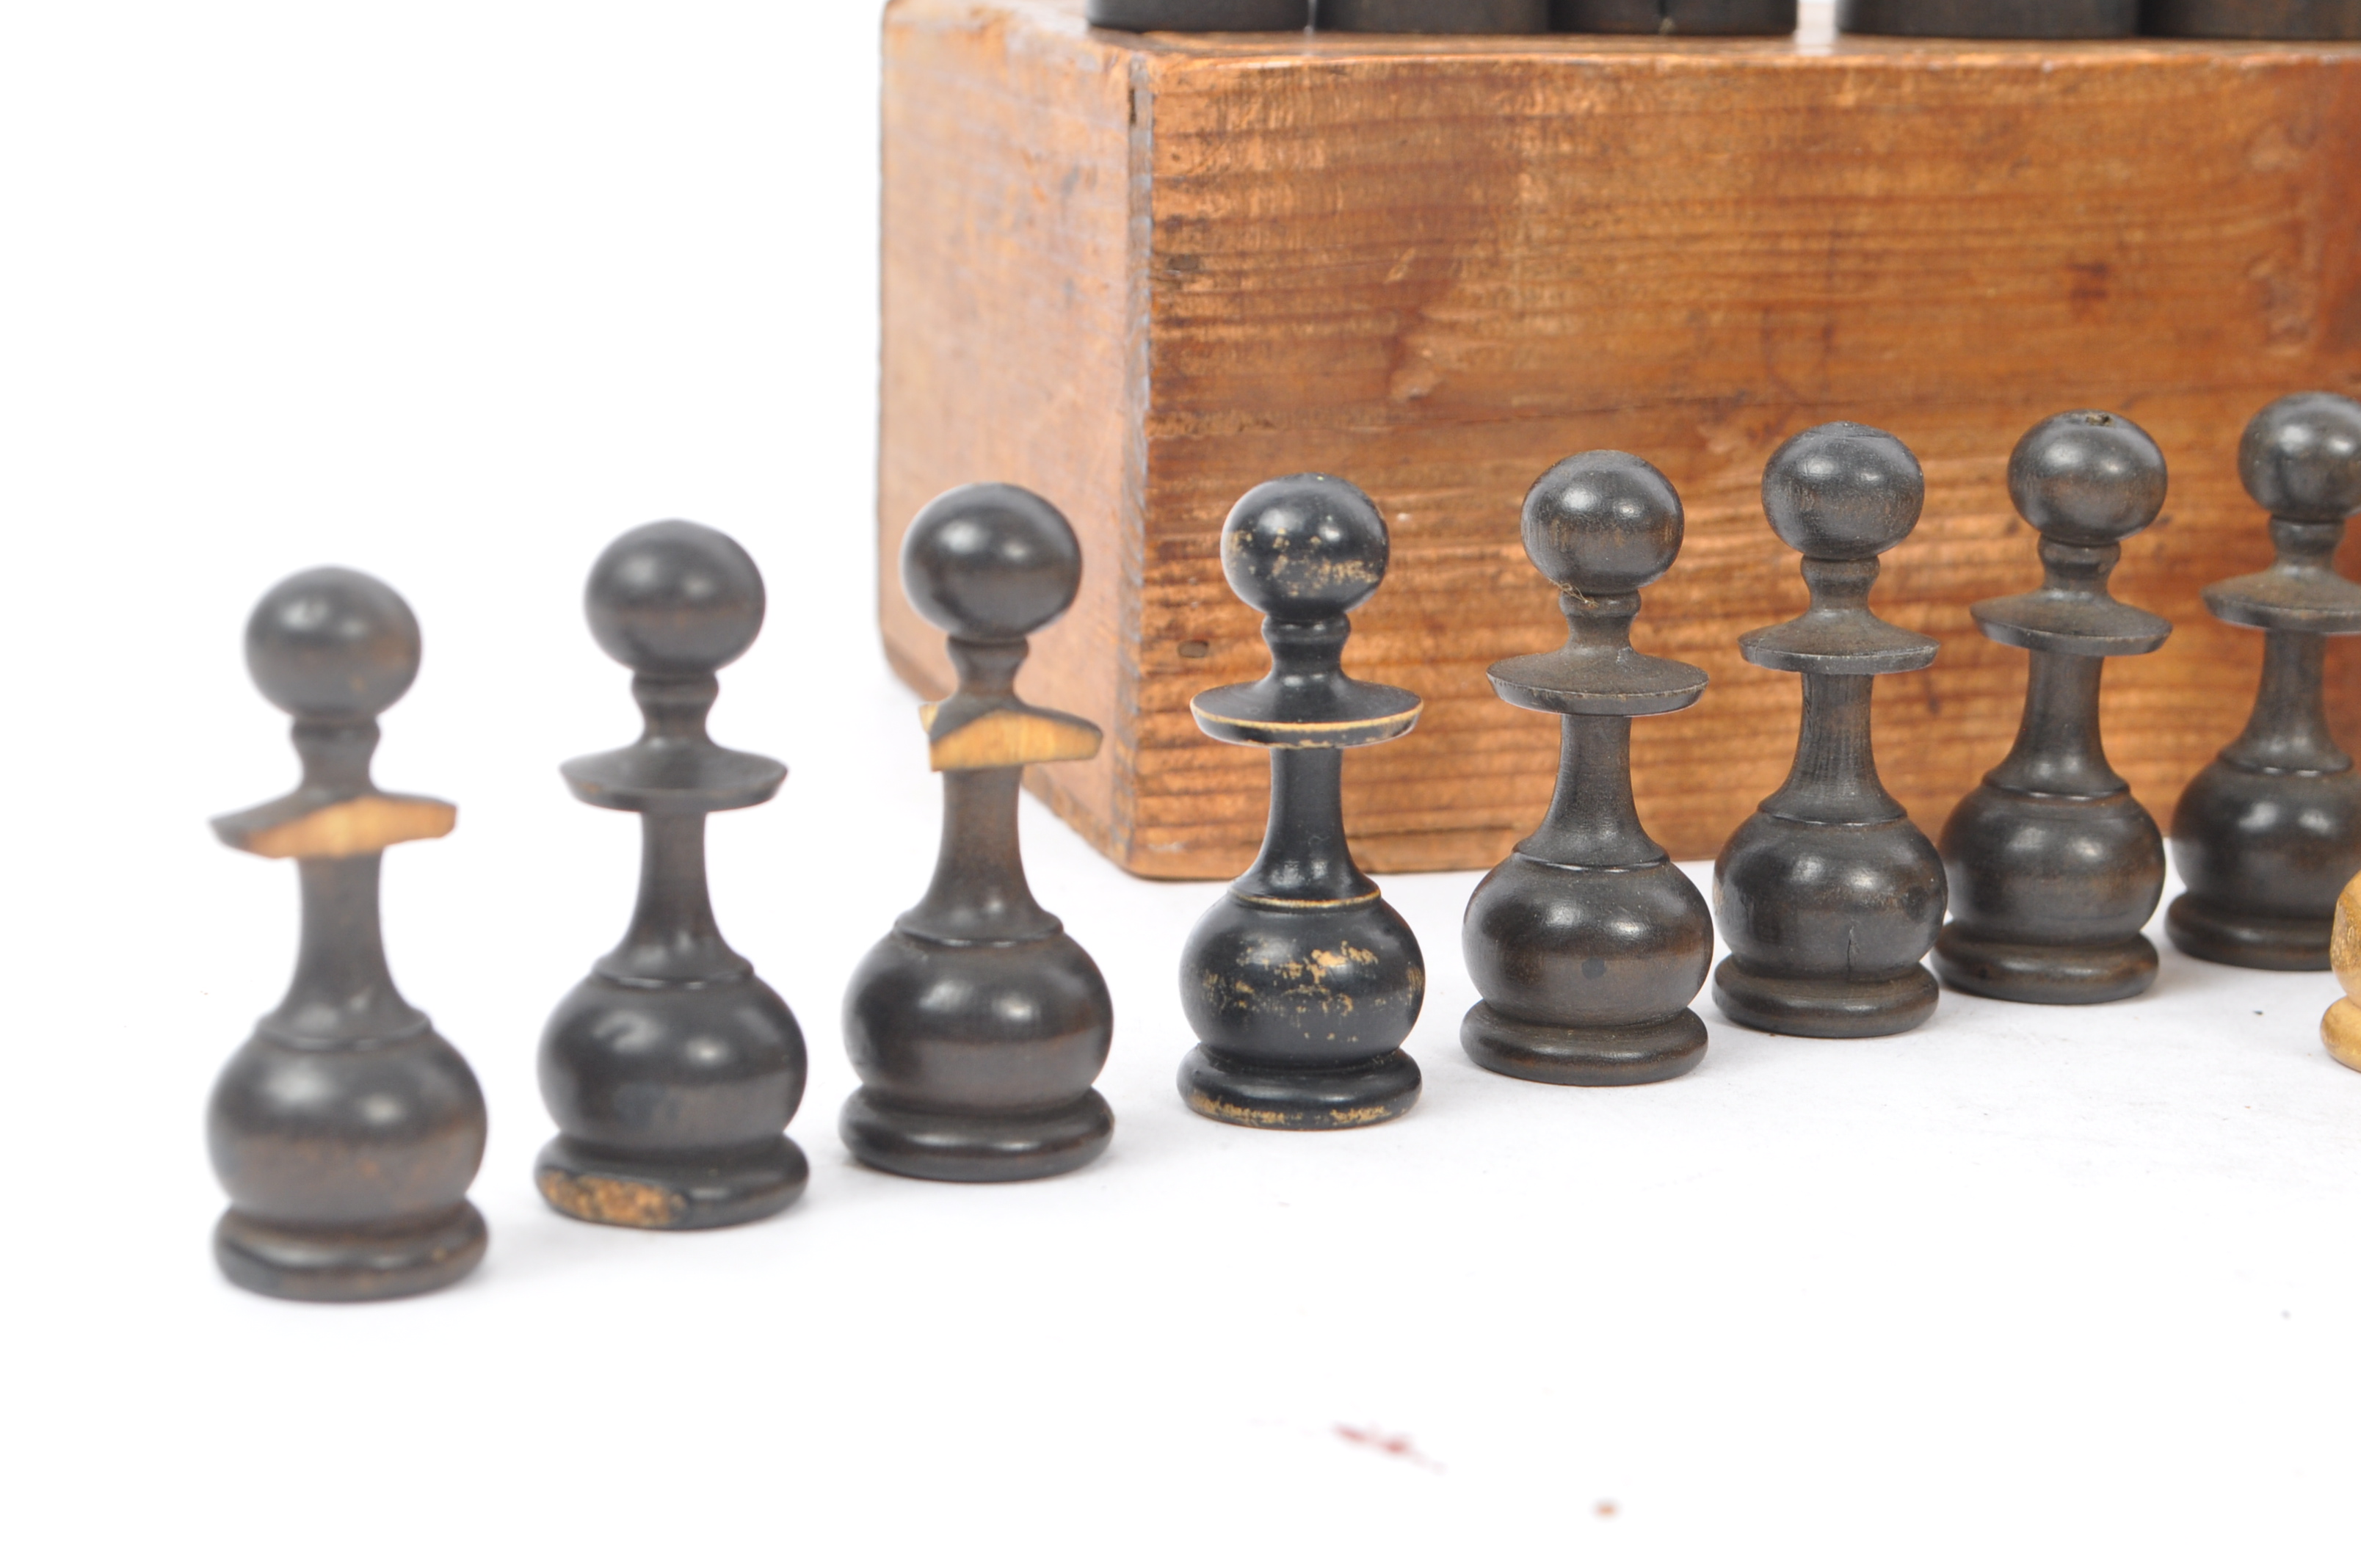 EARLY 20TH CENTURY TURNED WOODEN CHESS SET - Image 2 of 7